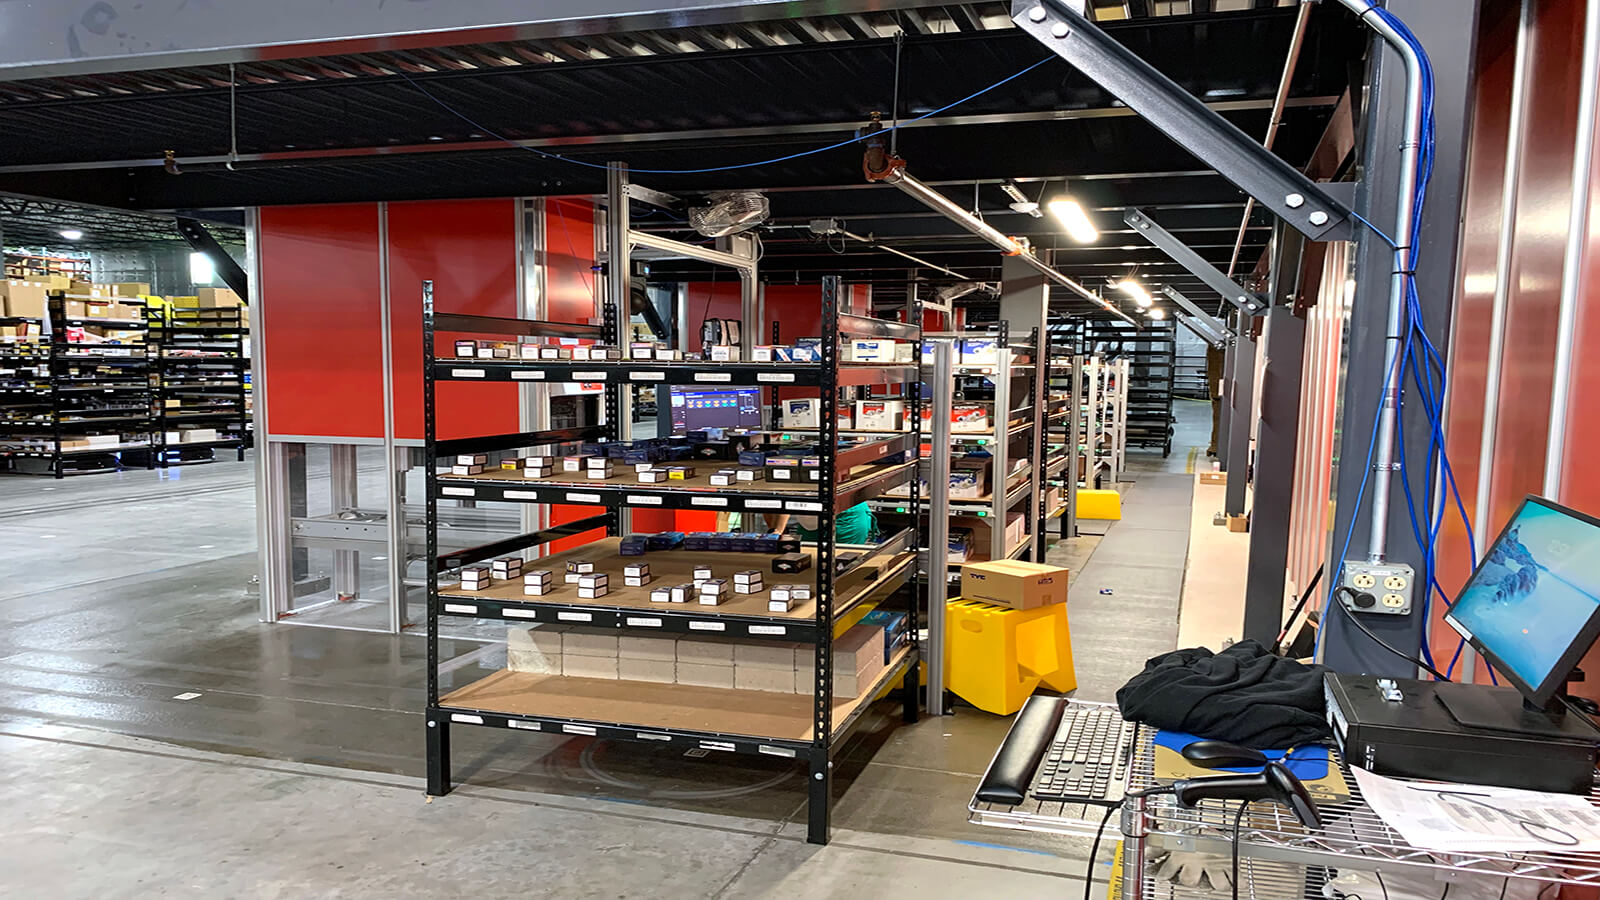 AutoStore grid with workstation and shelving in warehouse